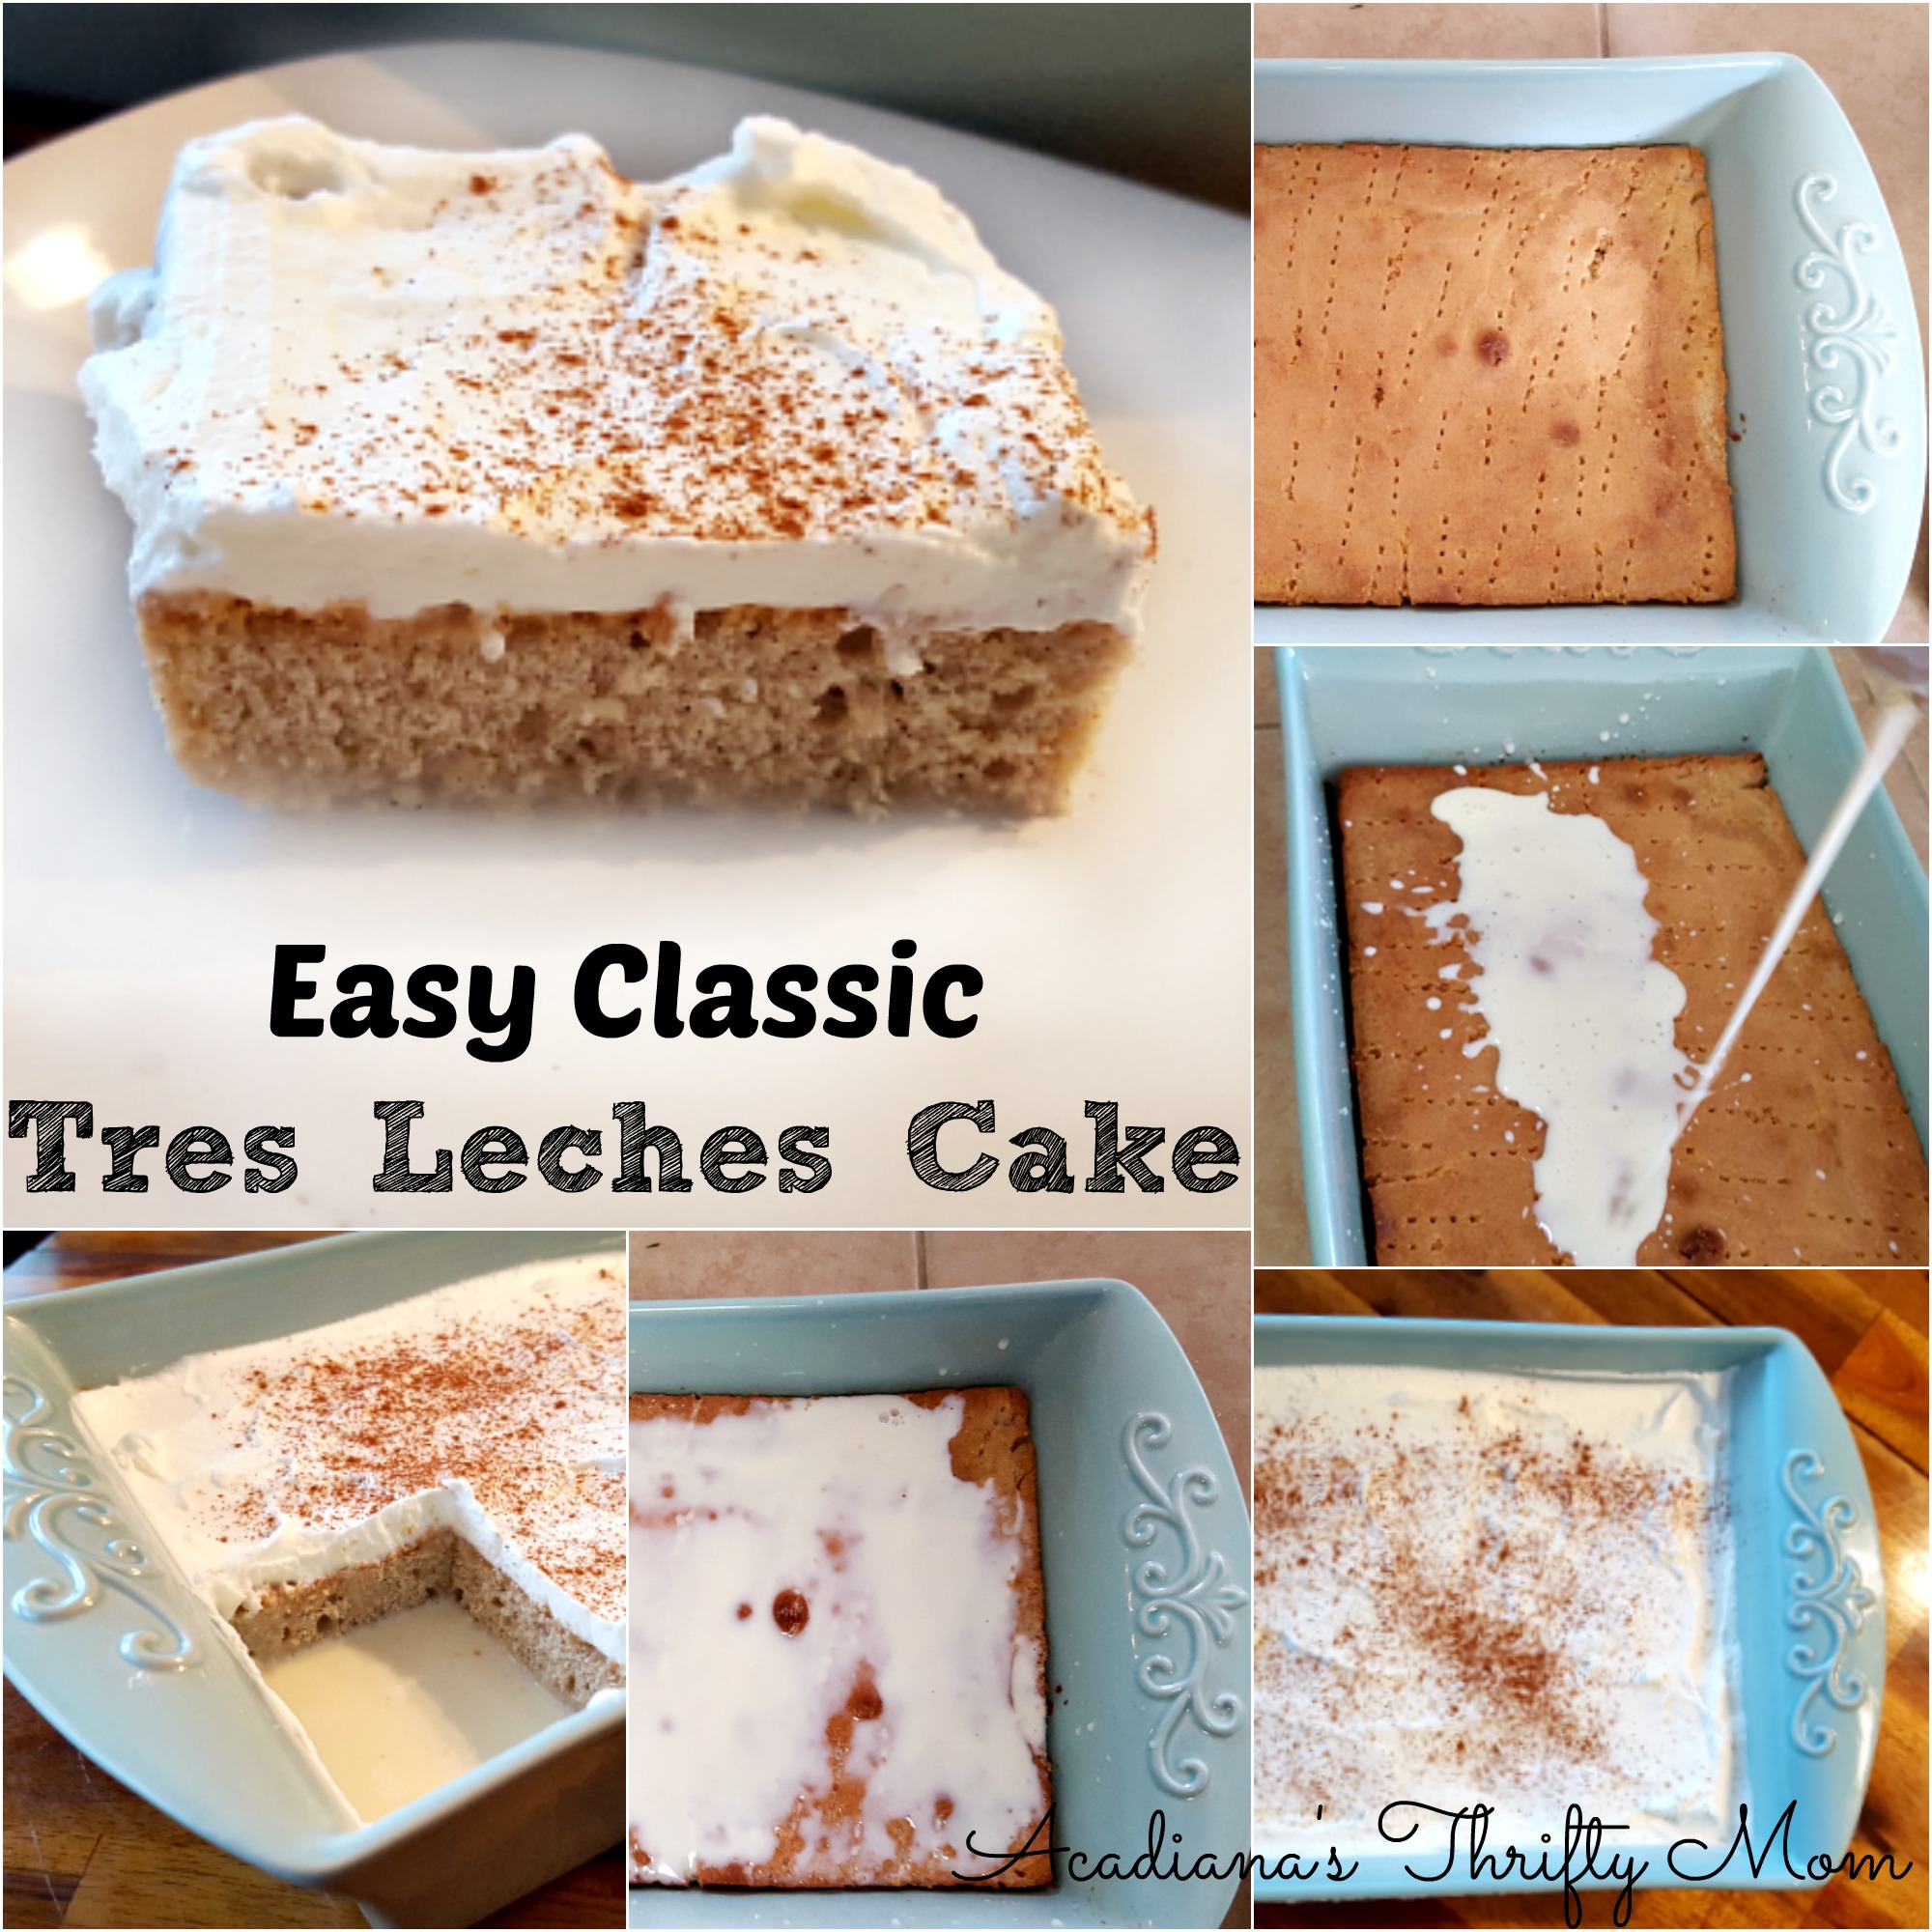 Easy Classic Tres Leches Cake